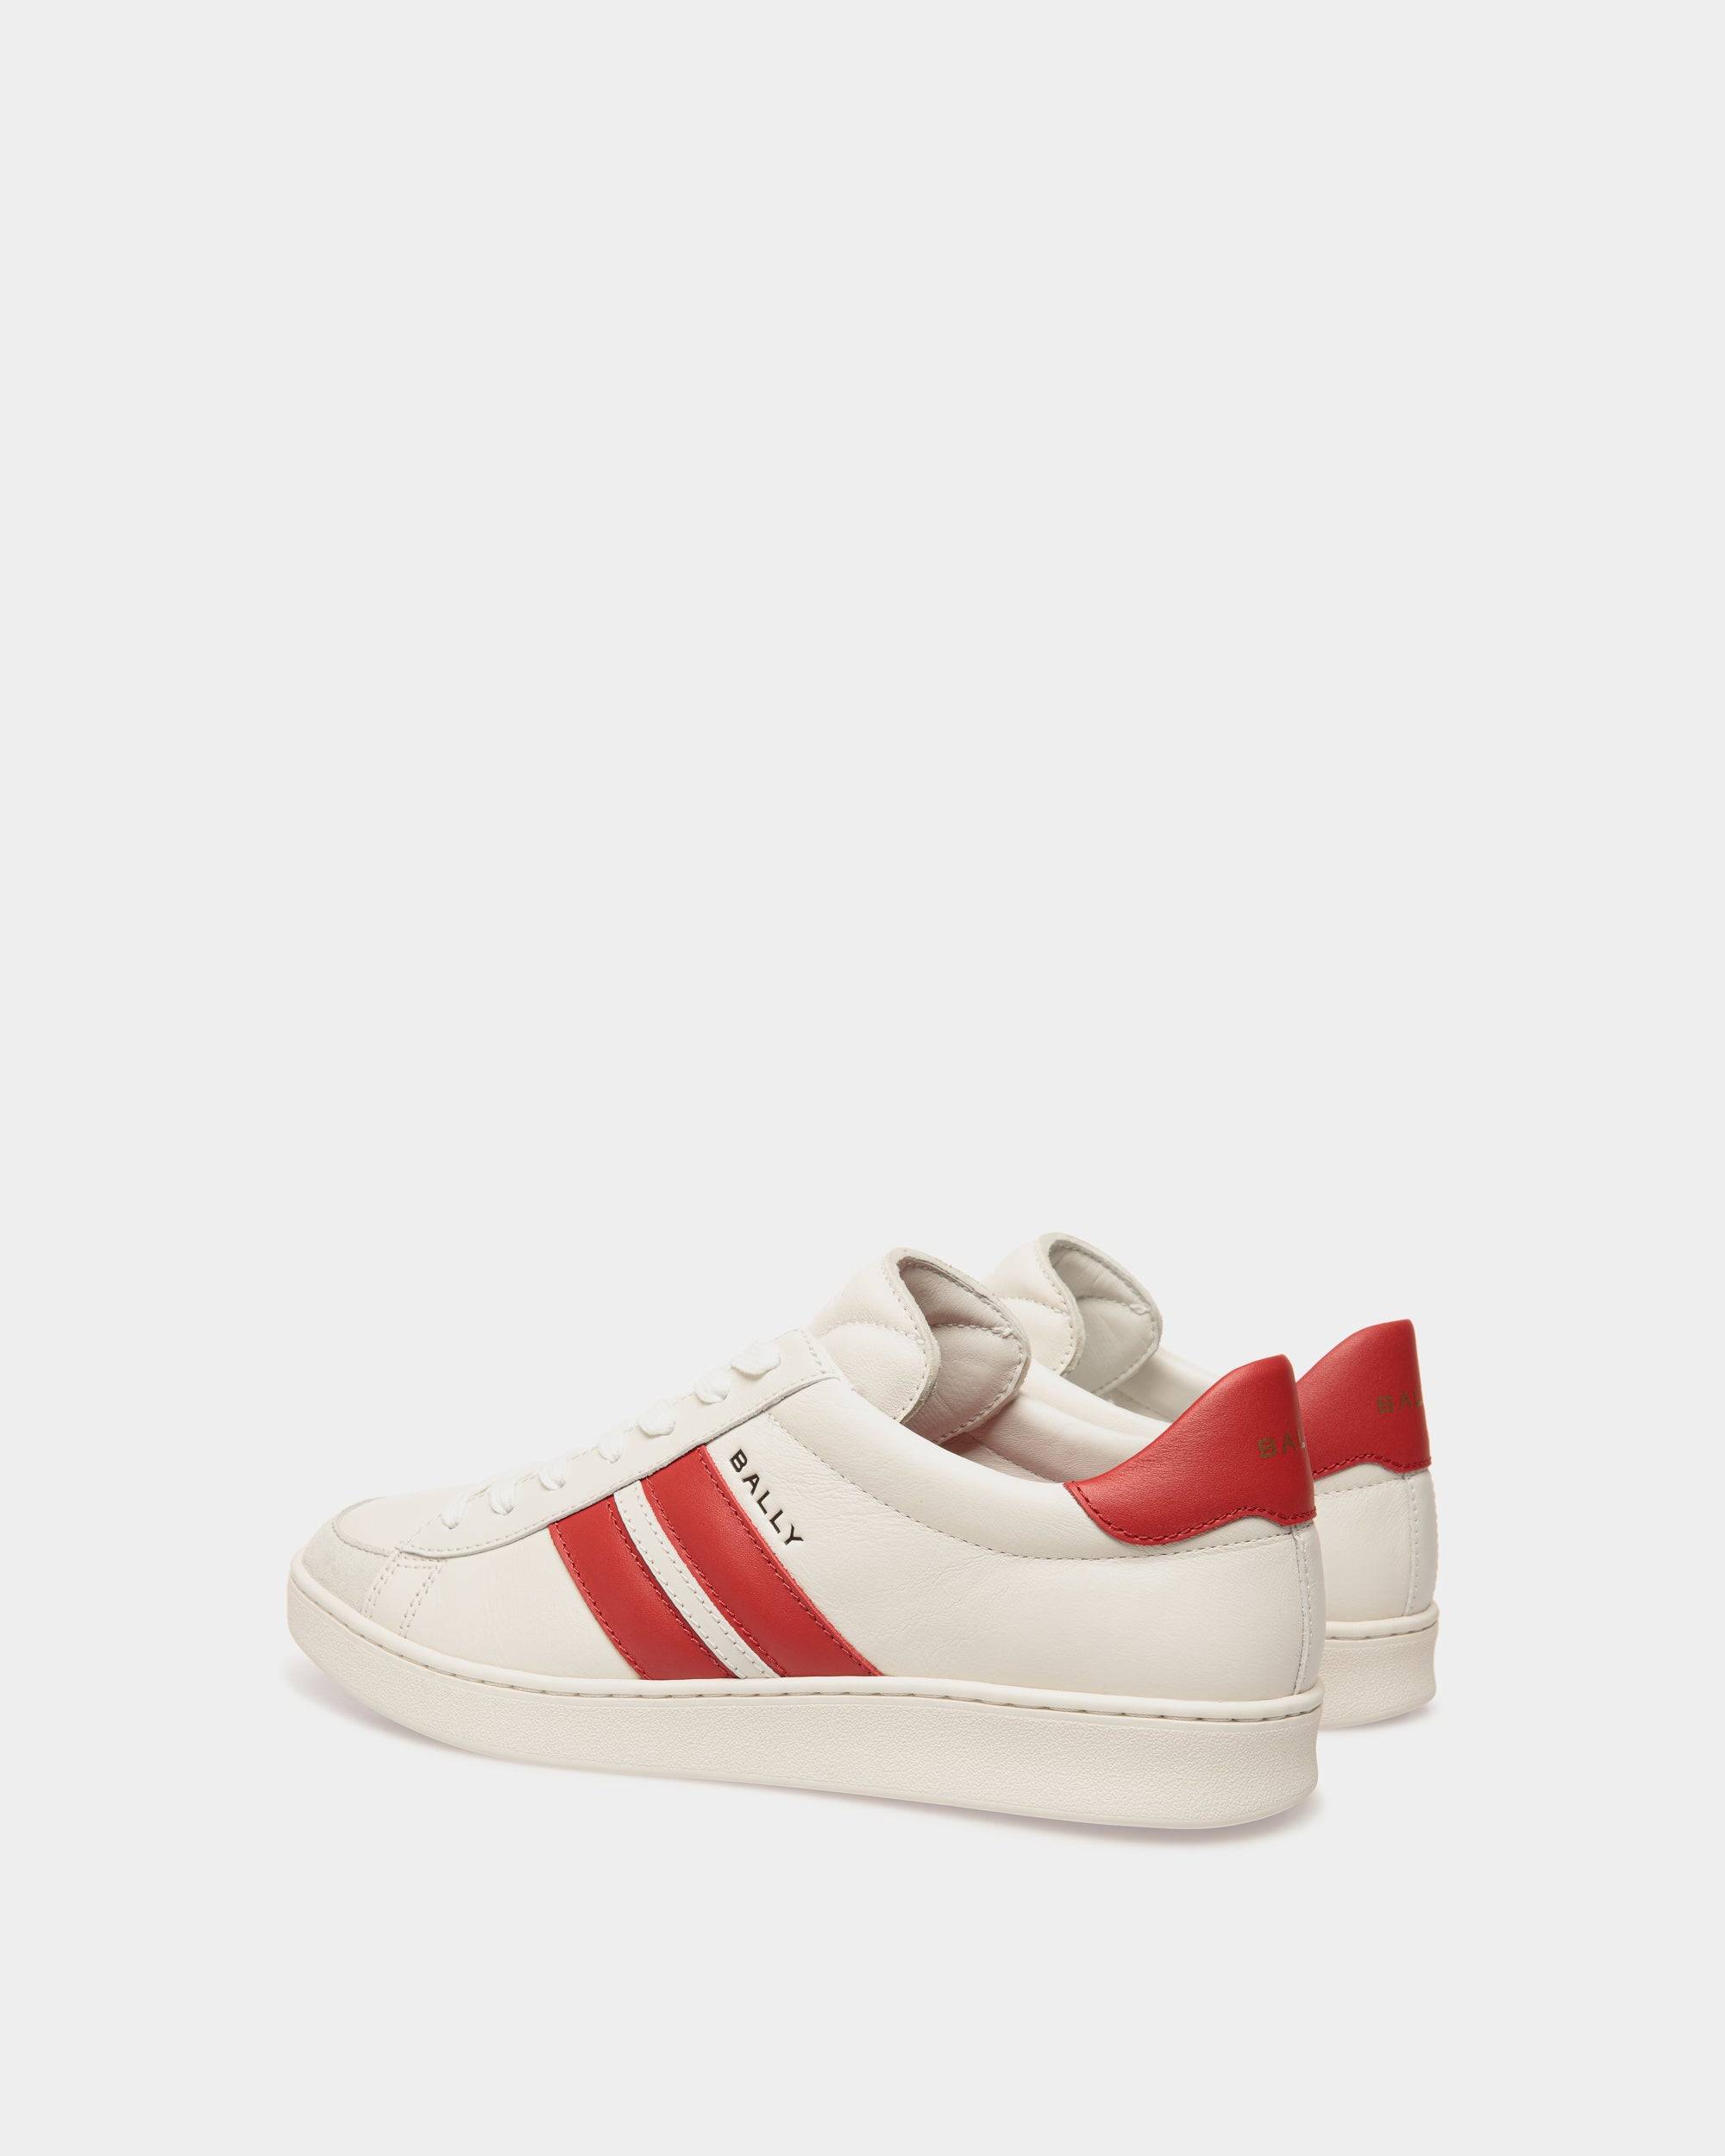 Tennis Sneaker in White and Candy Red Leather - Men's - Bally - 04